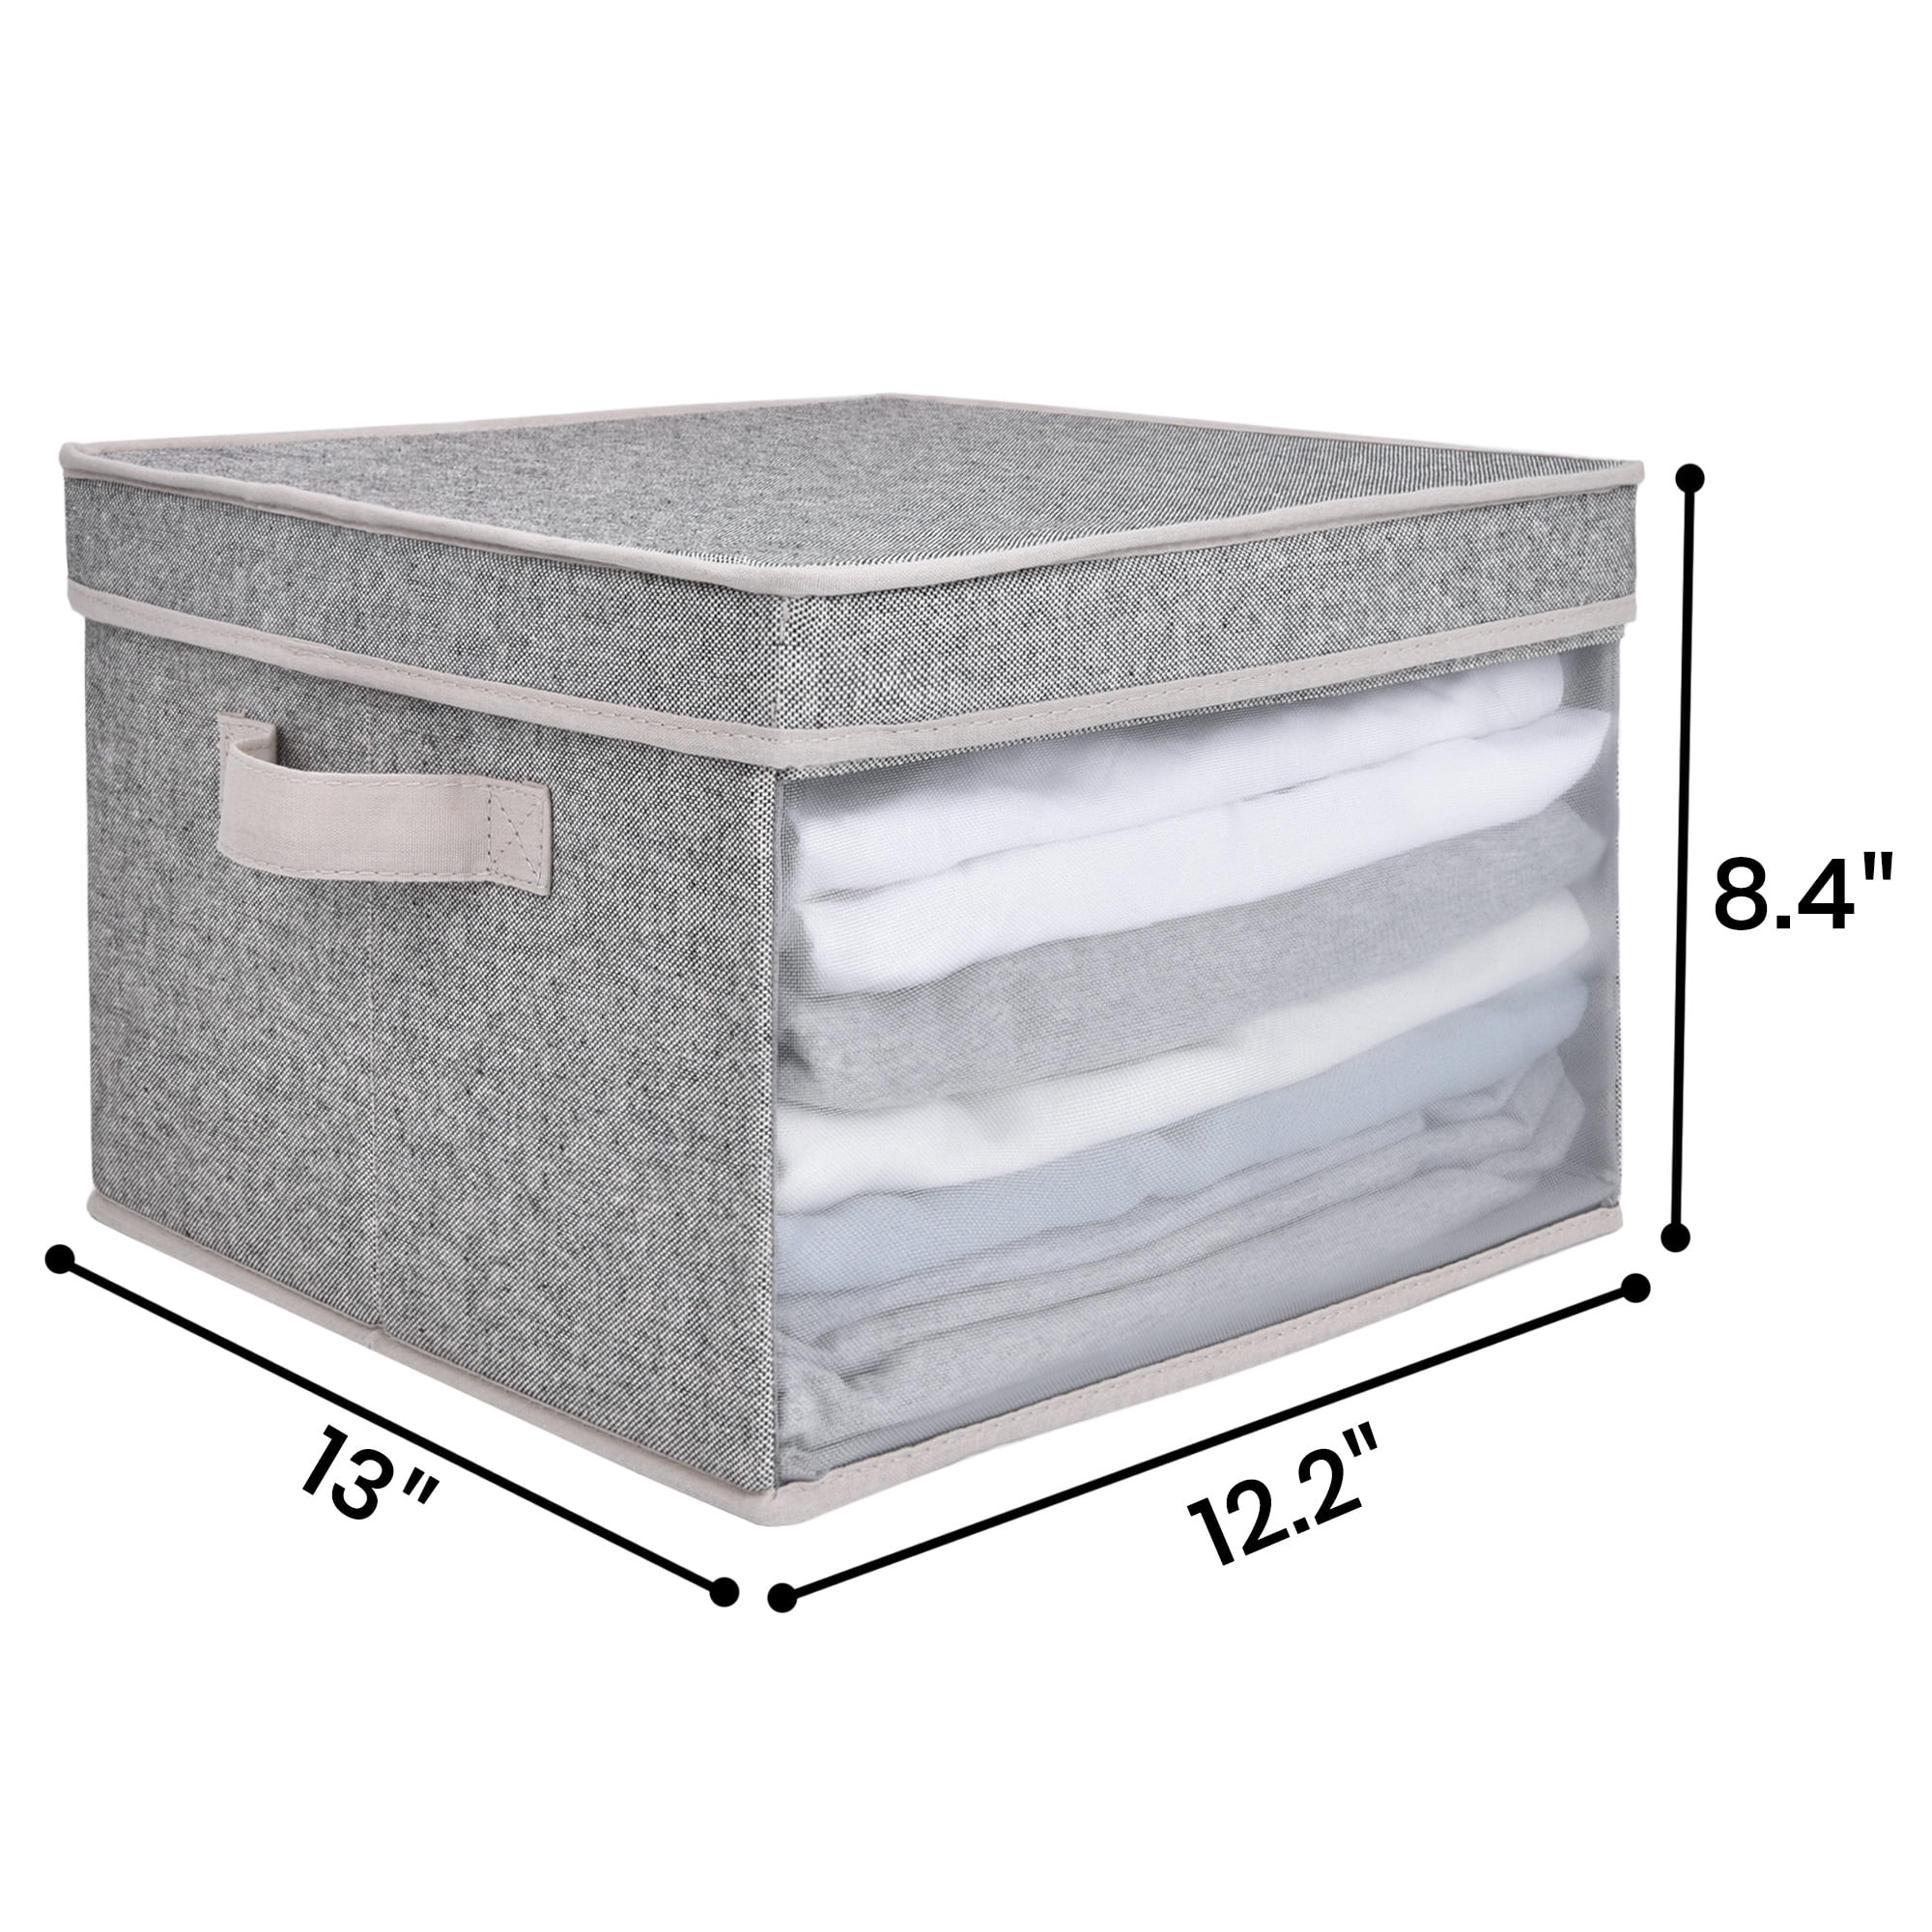 StorageWorks Foldable Storage Bins with Lids, Fabric Collapsible Storage Box for Closet Organization, Stackable Container with See-Through Window